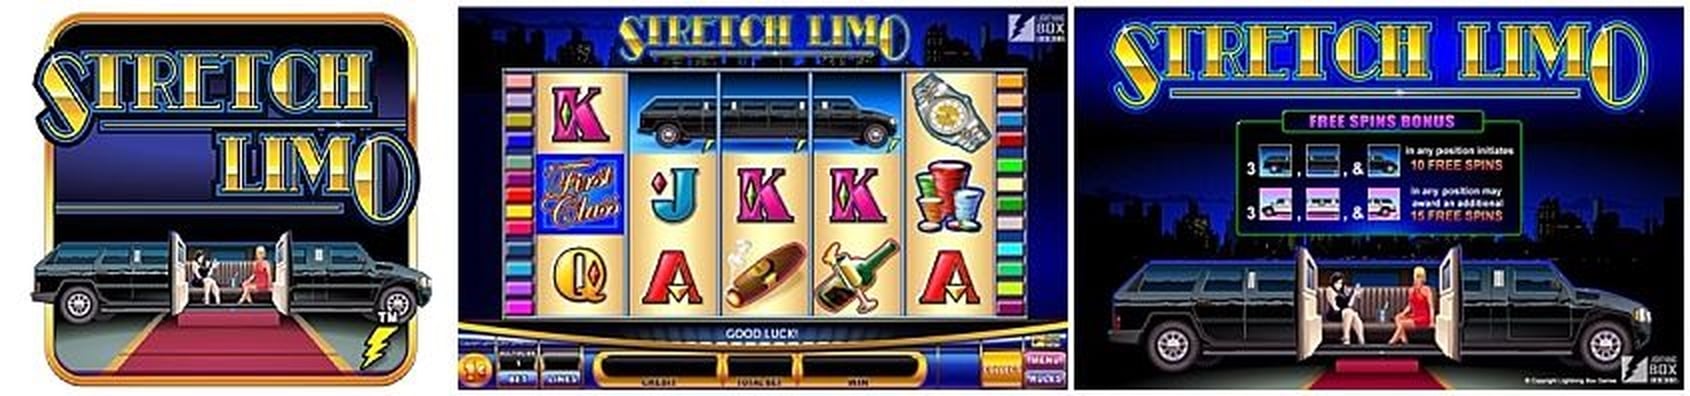 The Stretch Limo Online Slot Demo Game by Lightning Box